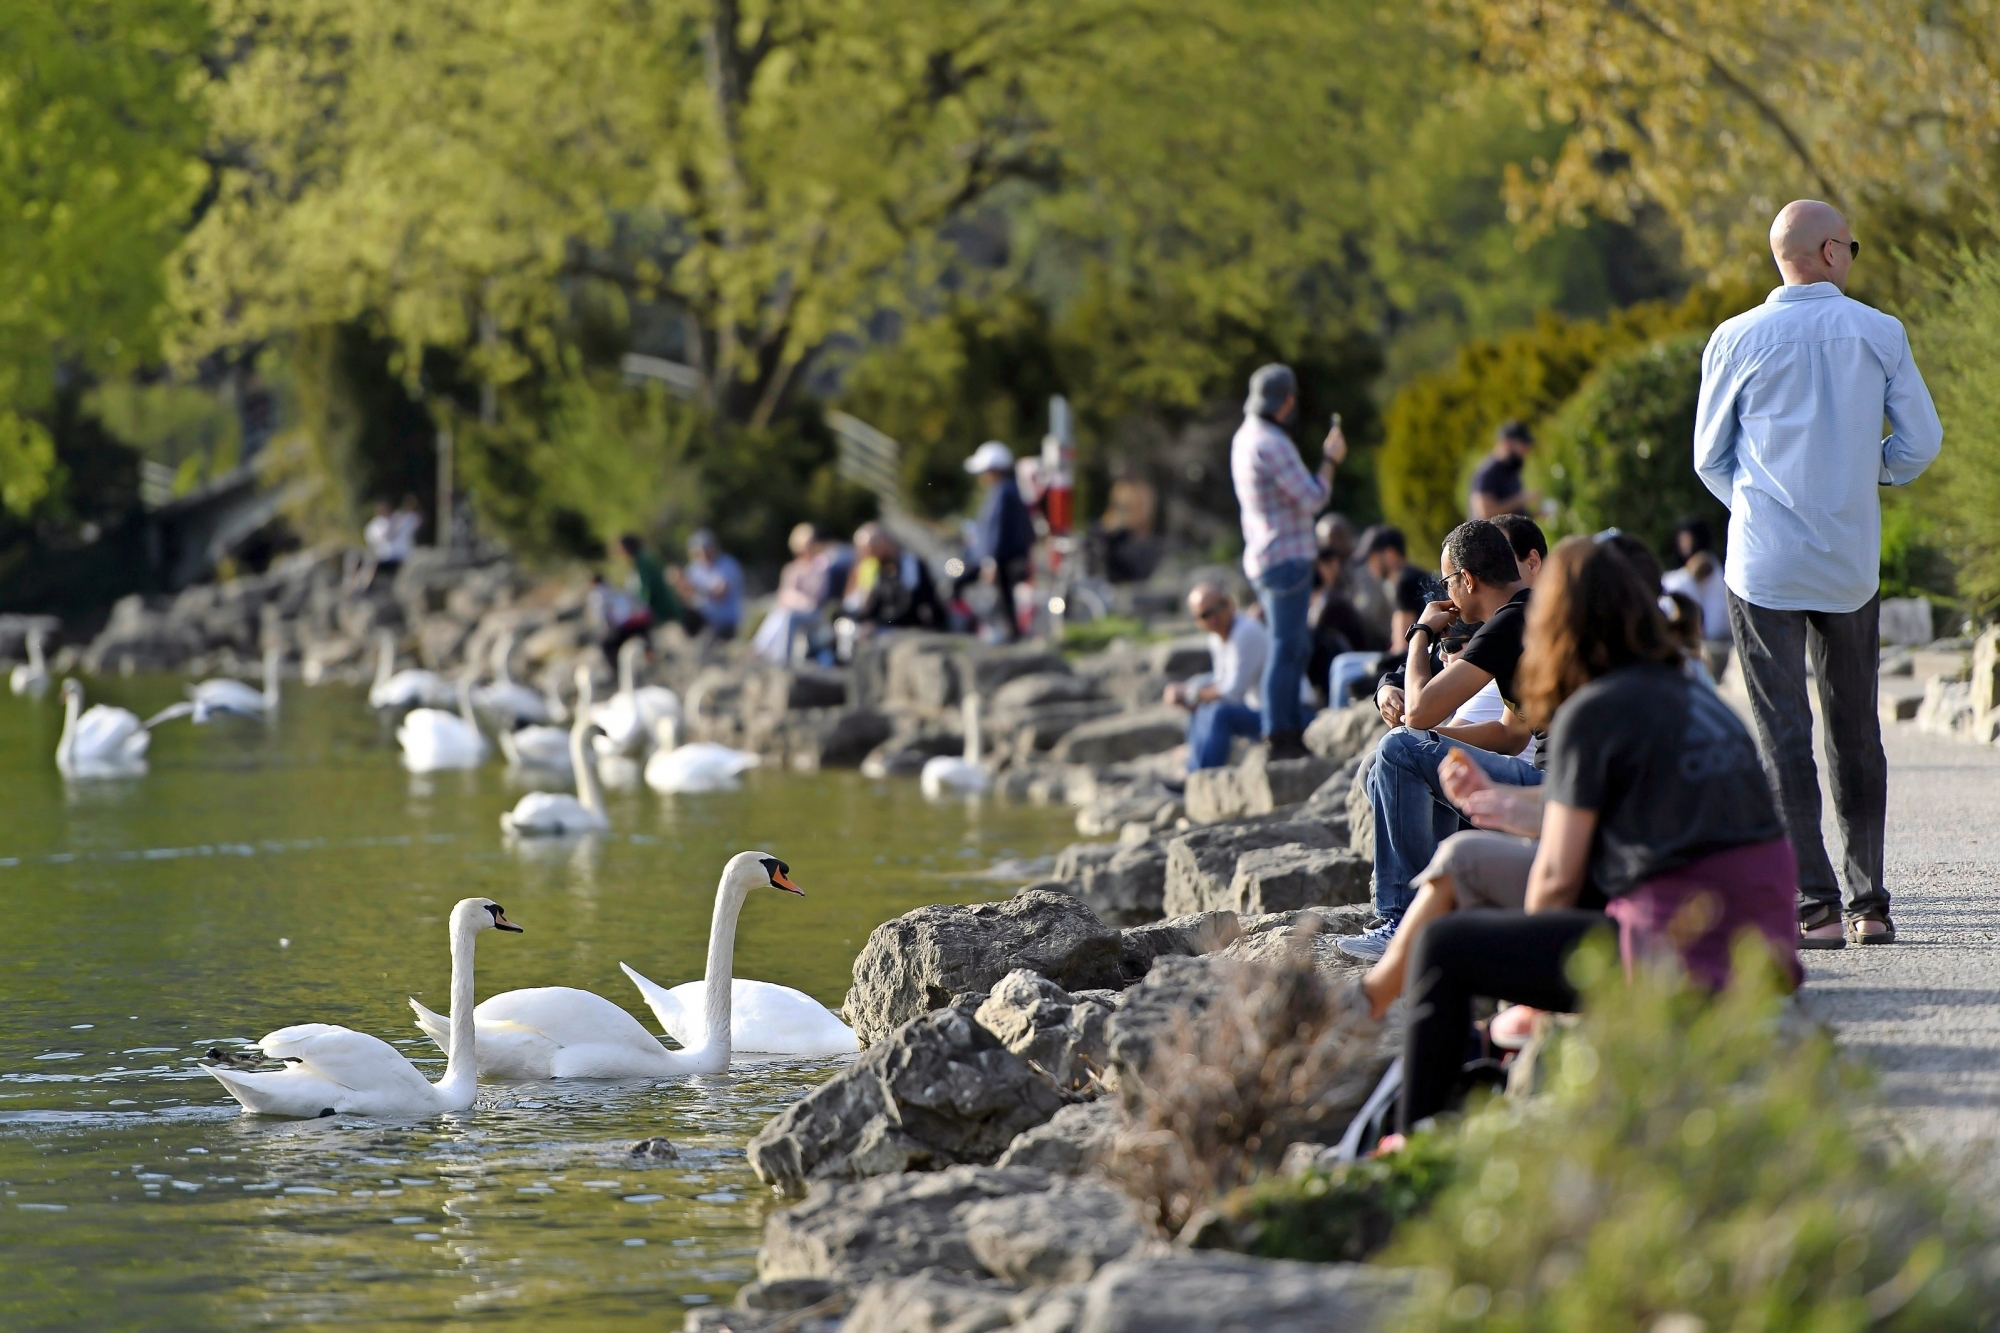 People enjoy the sun on the shore of Lake Biel during the state of emergency of the coronavirus disease (COVID-19) outbreak, in Biel, Switzerland, Monday, April 13, 2020. Countries around the world are taking increased measures to stem the widespread of the SARS-CoV-2 coronavirus, which causes the Covid-19 disease. (KEYSTONE/Anthony Anex) SWITZERLAND CORONAVIRUS OUTBREAK